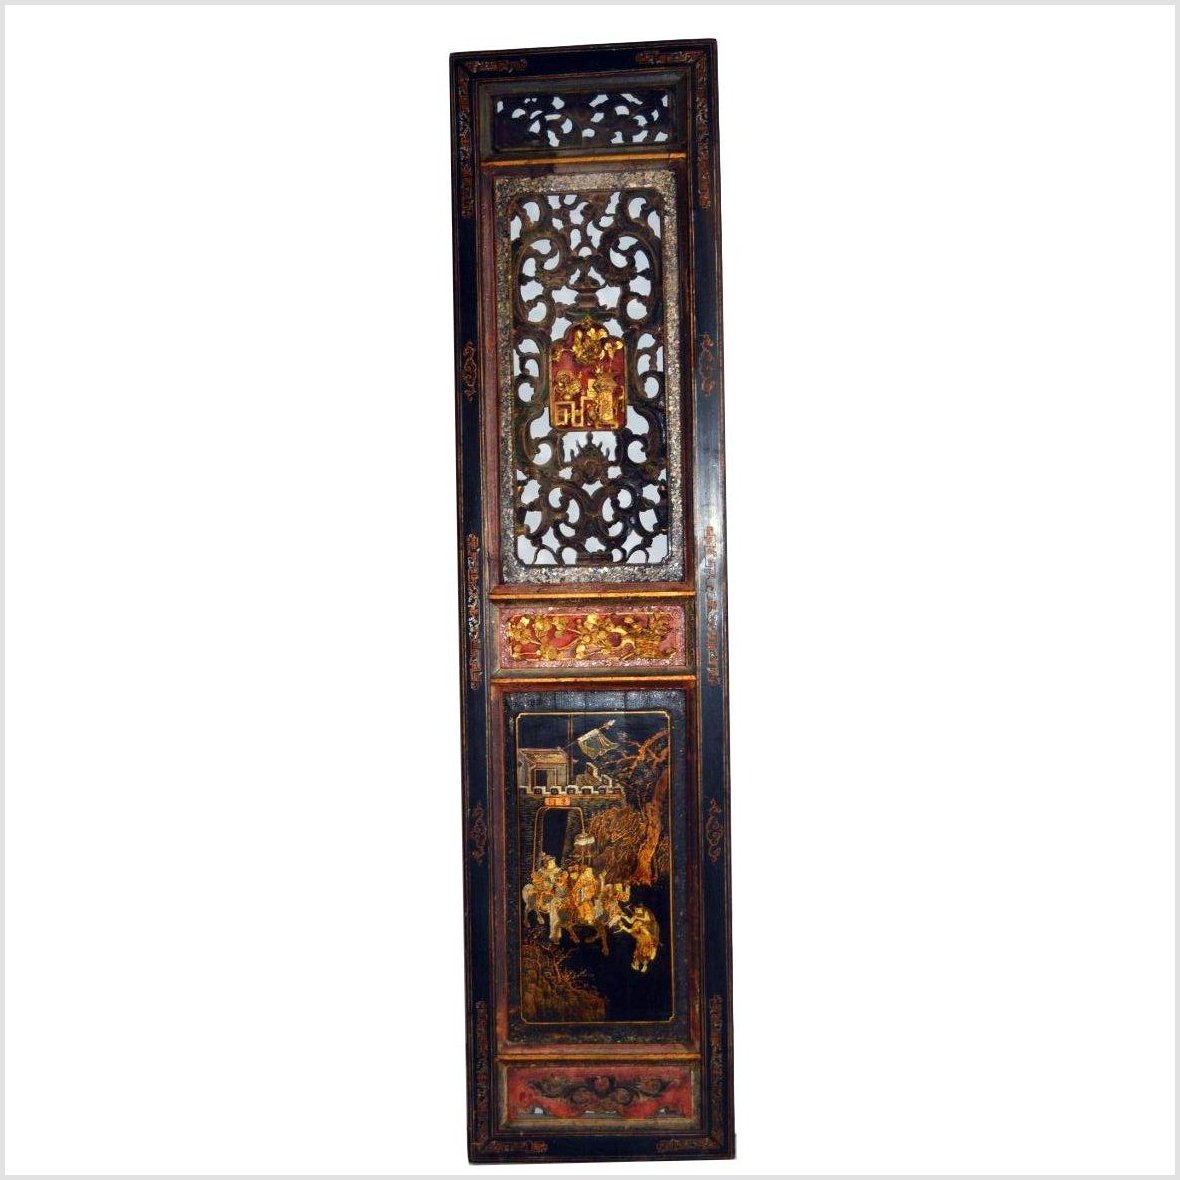 Antique Chinese Hand-Carved Wall Ornament-YN3036-1. Asian & Chinese Furniture, Art, Antiques, Vintage Home Décor for sale at FEA Home